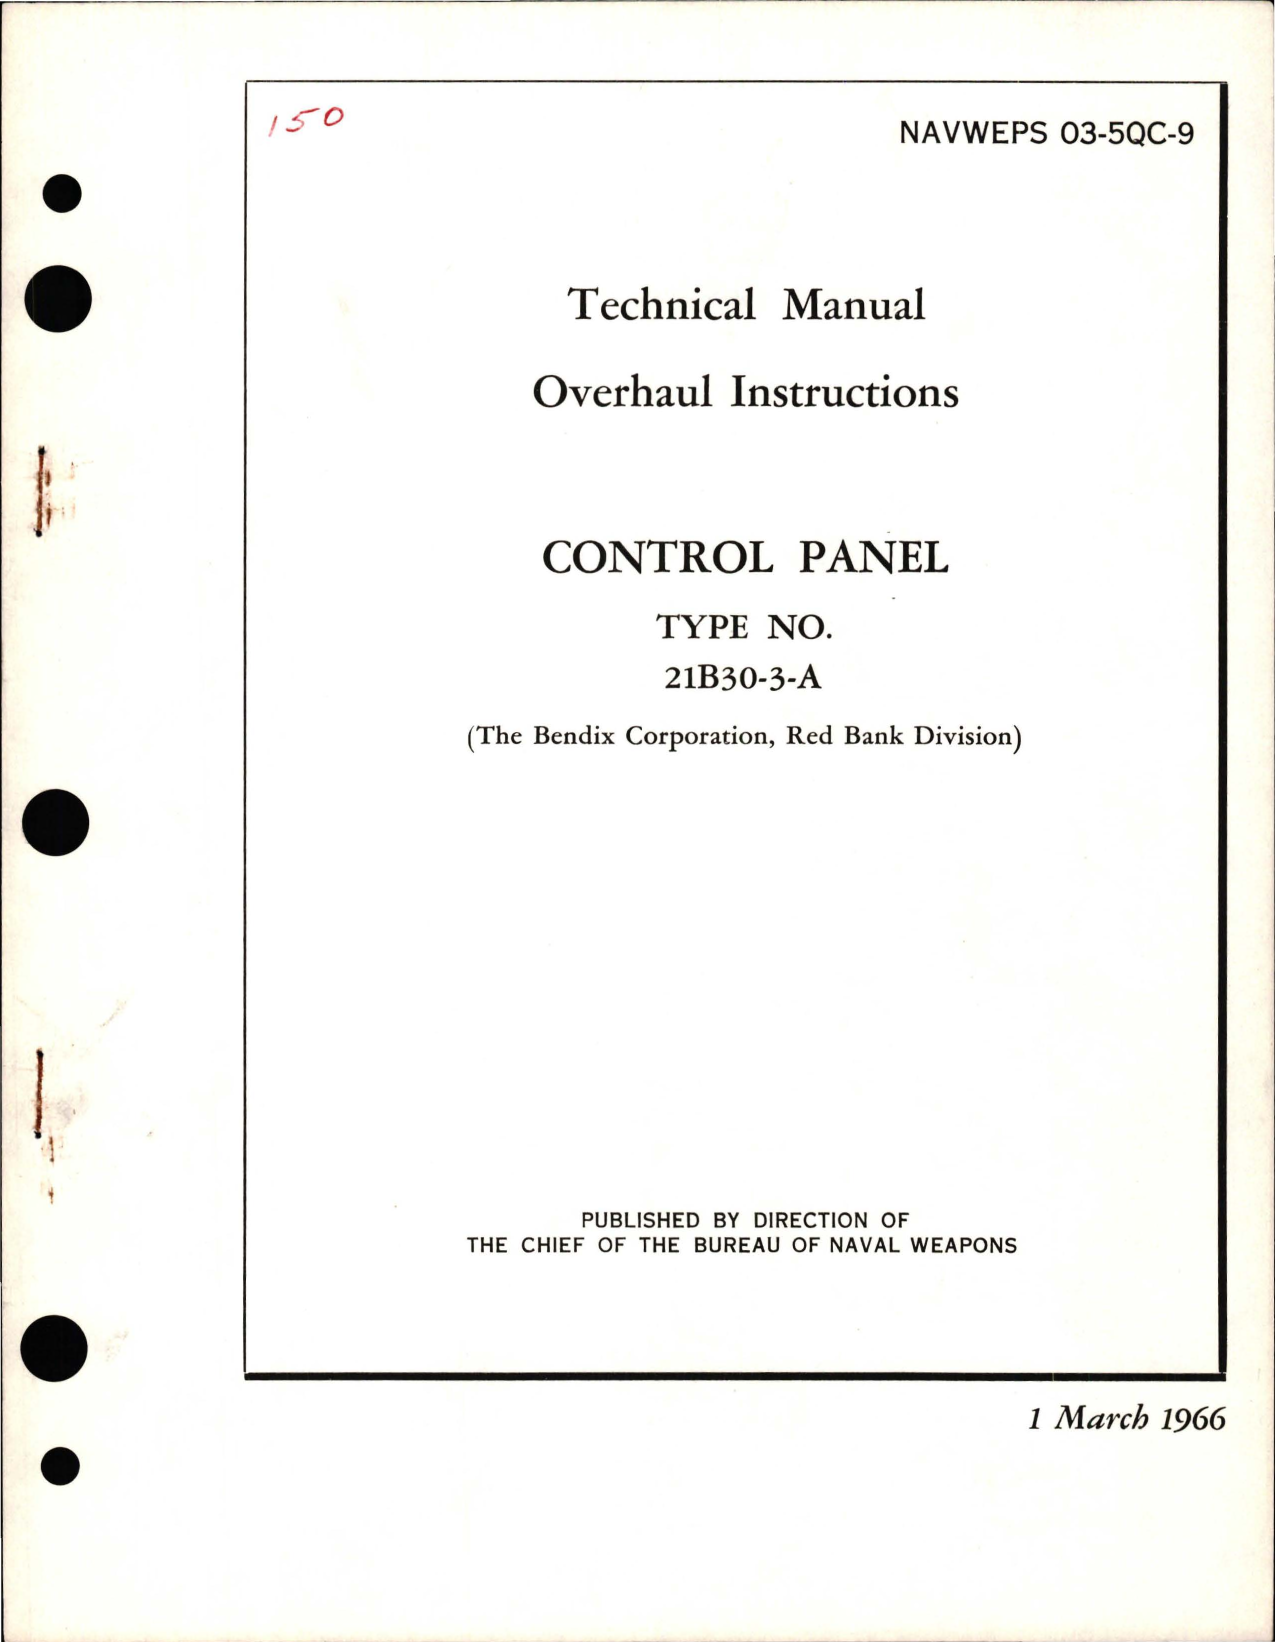 Sample page 1 from AirCorps Library document: Overhaul Instructions for Control Panel - Type 21B30-3-A